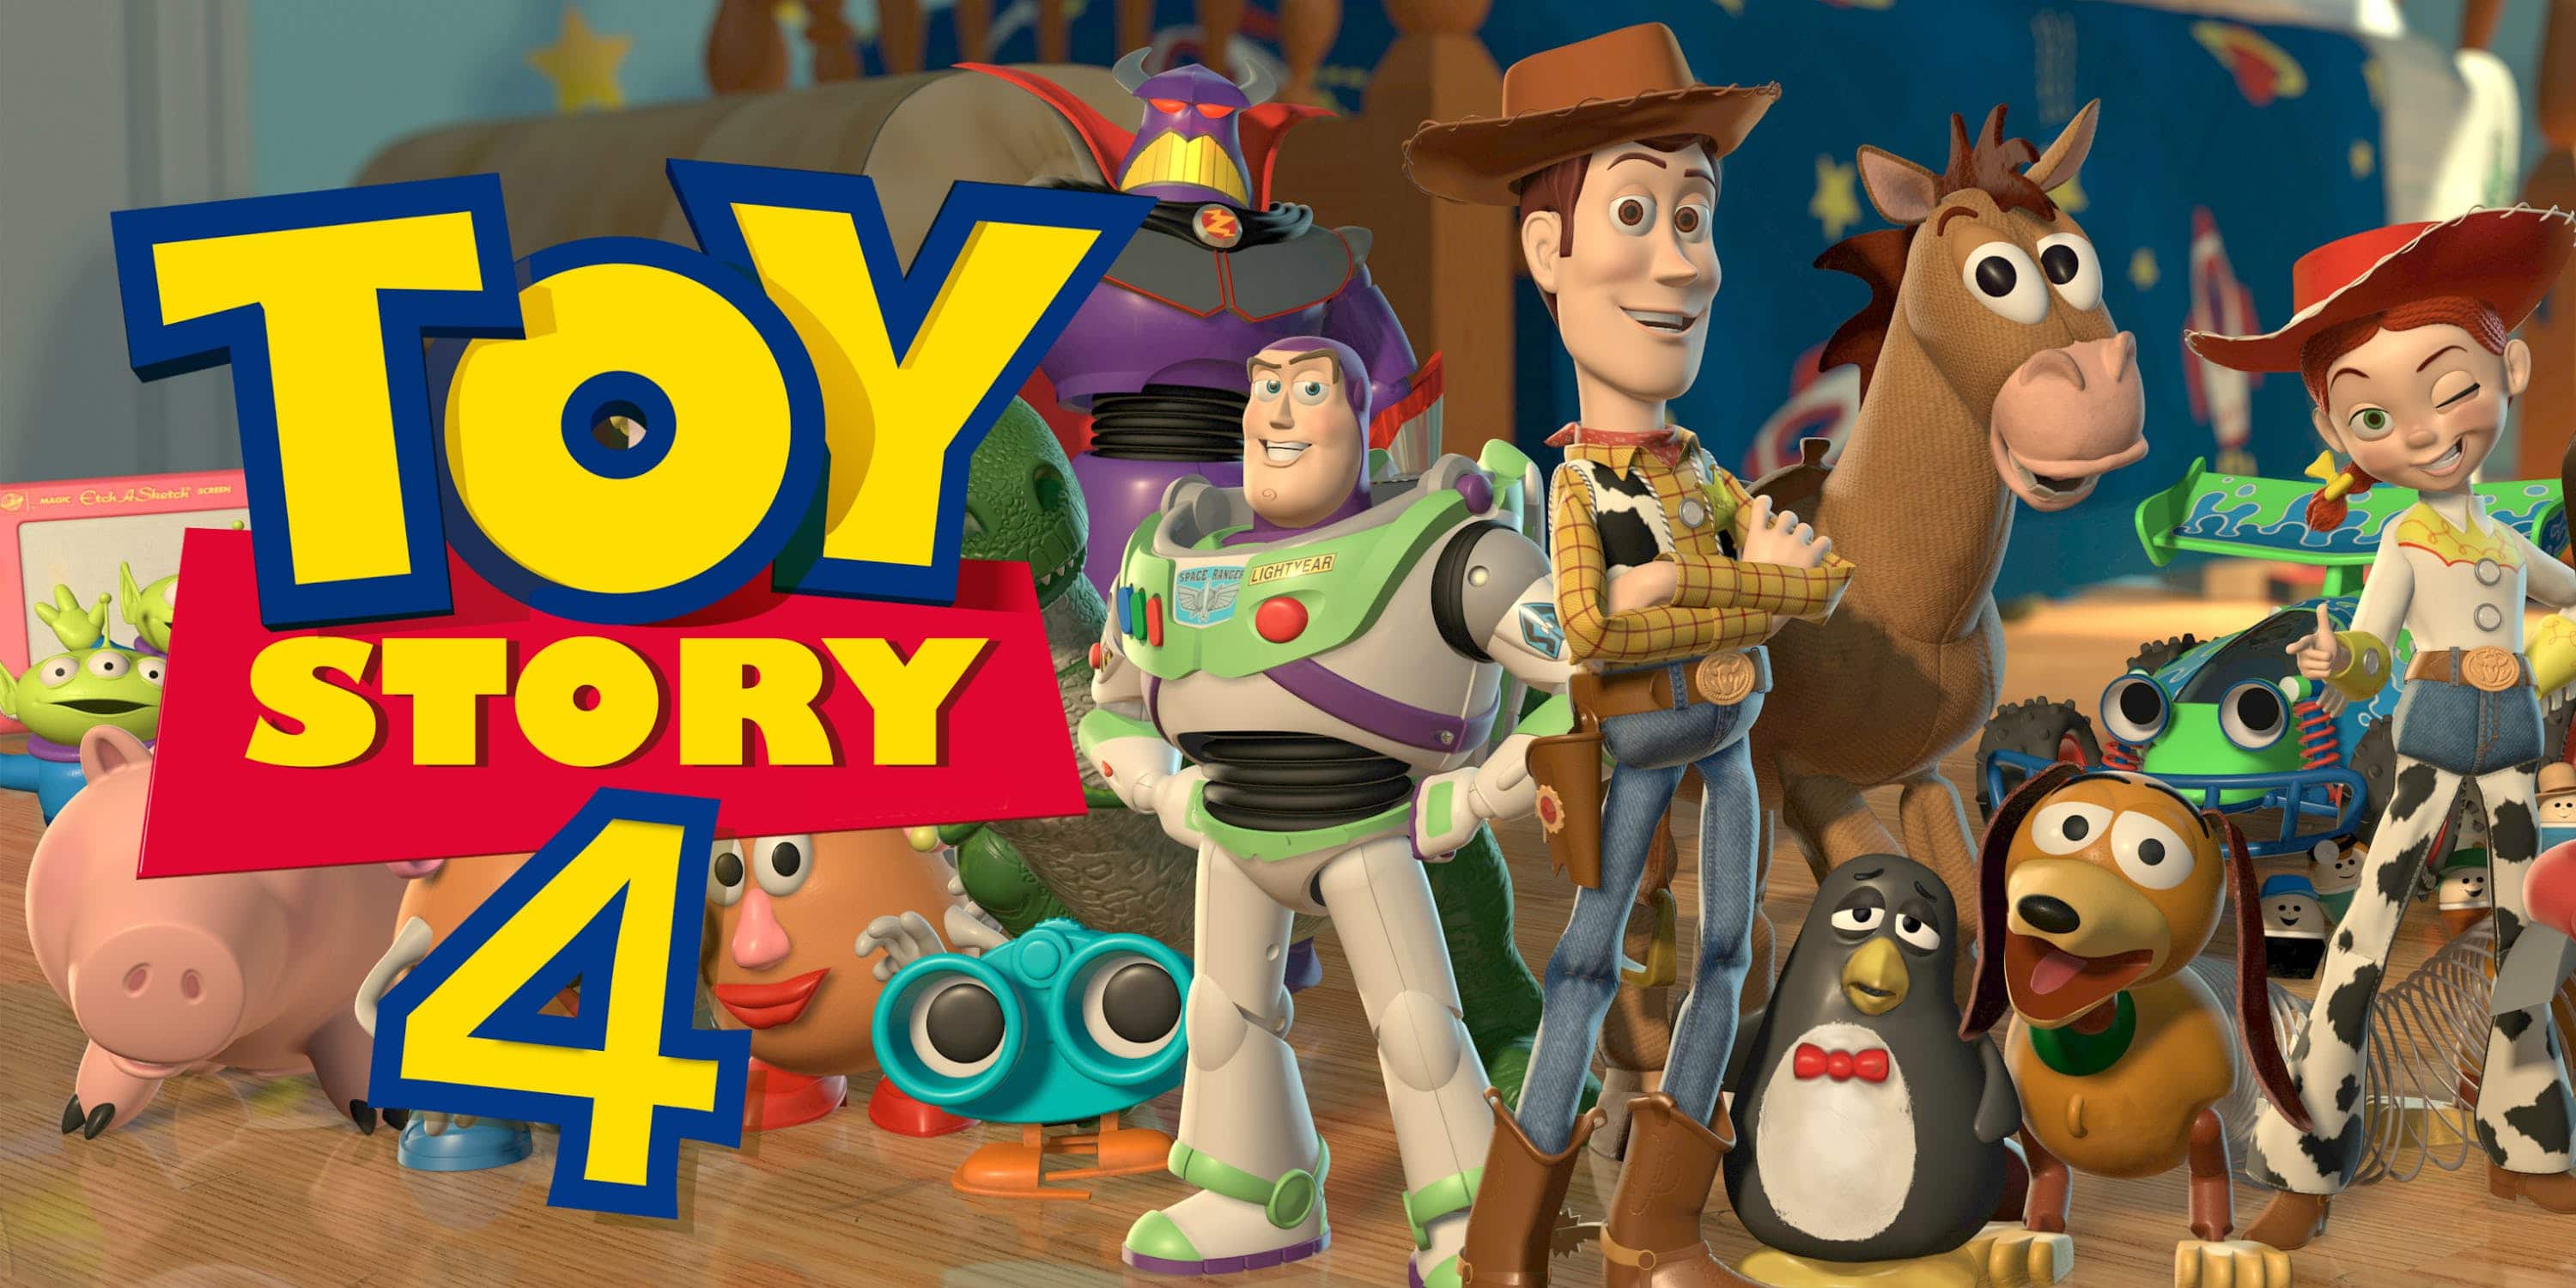 No One Has Given Toy Story 4 a Negative Review on Rotten Tomatoes Yet